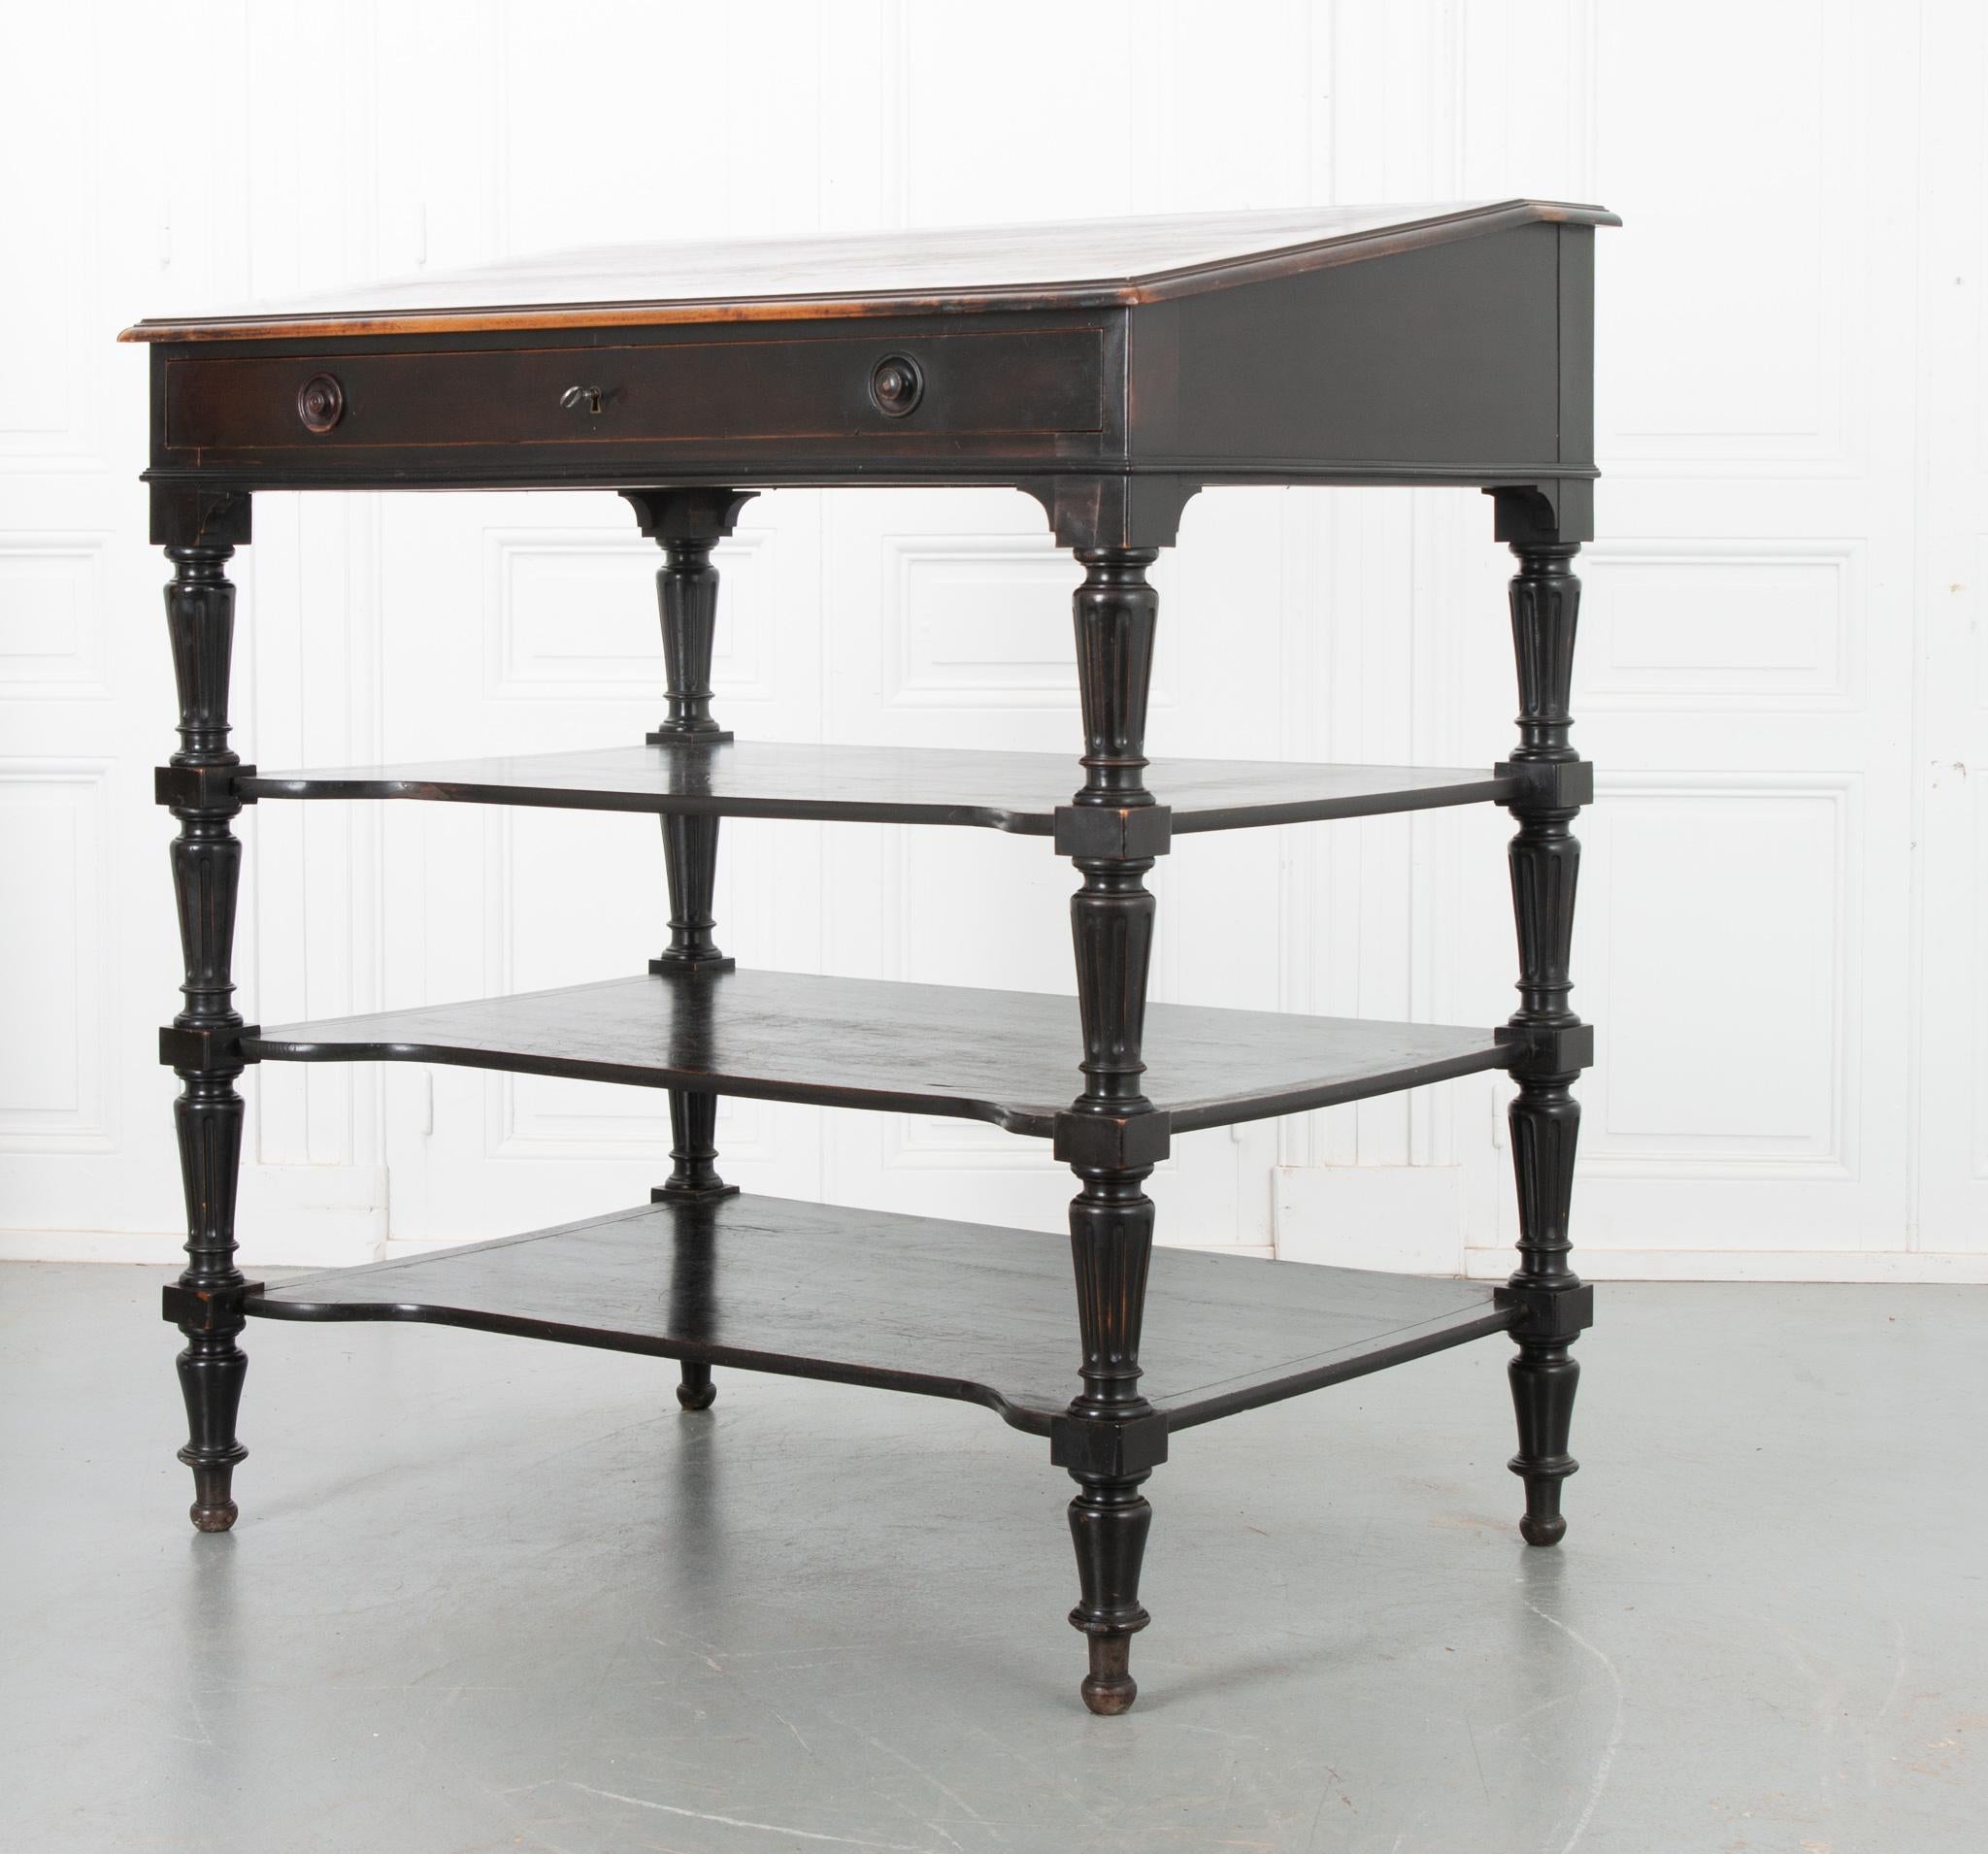 This 19th century drafting table from France is impressive in both scale and construction. Used by architects and drafters, the desk’s tilted surface brings the back of the table towards the artist, minimizing reach, and saving their aching backs.